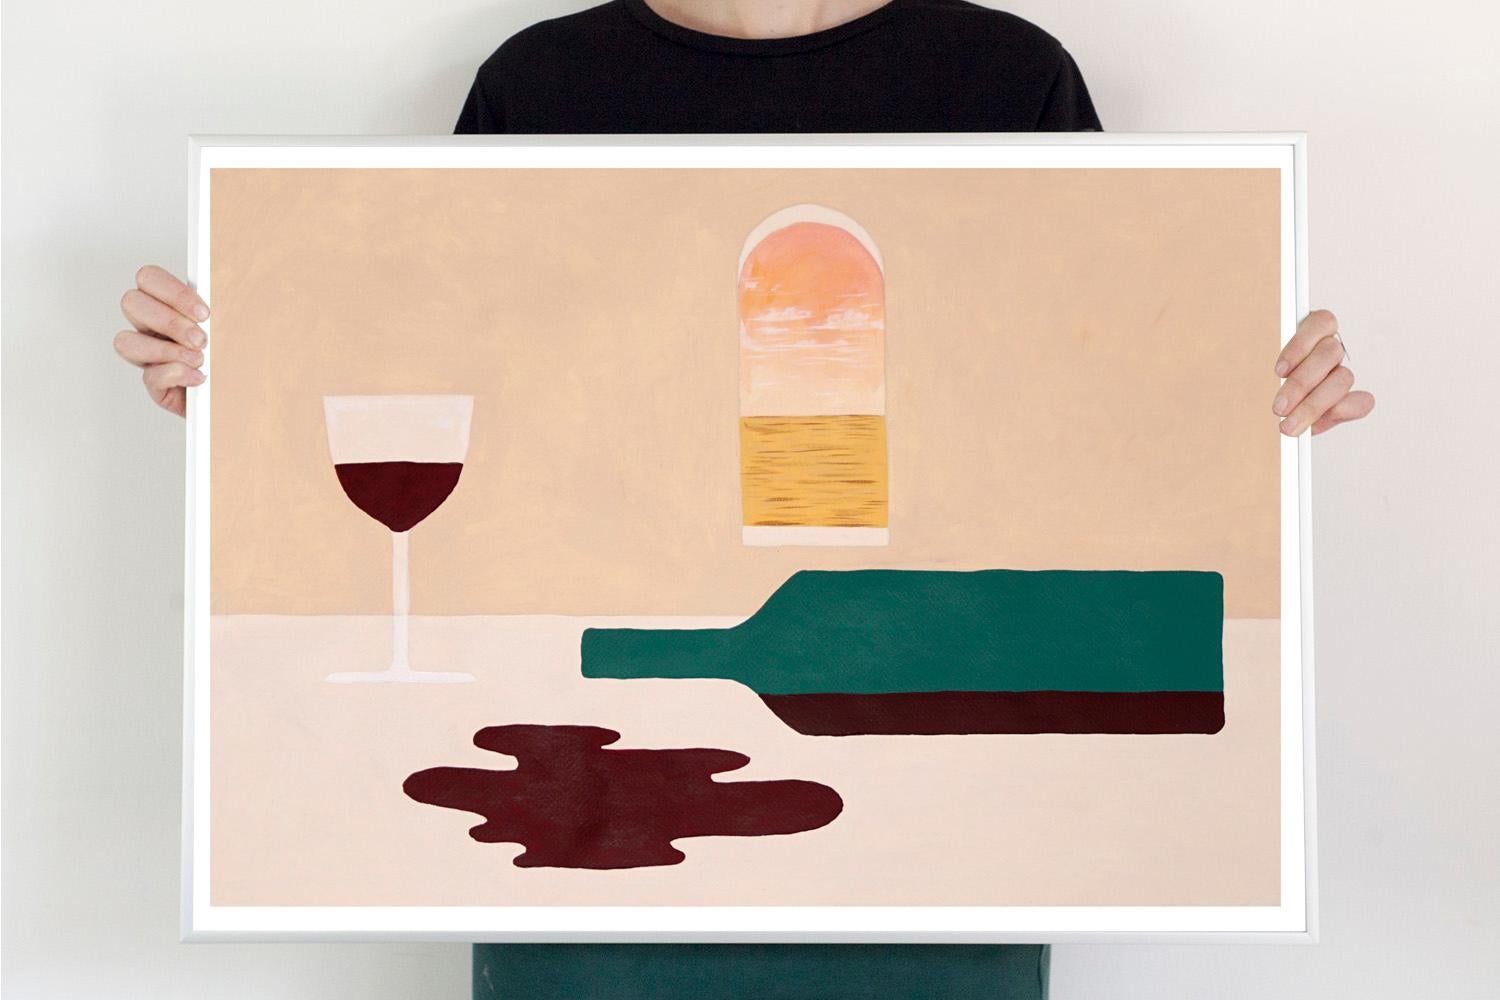 Empty Bottle of Wine, Horizontal Modern Still Life in Earth Tones, Tuscany Views - Painting by Gio Bellagio